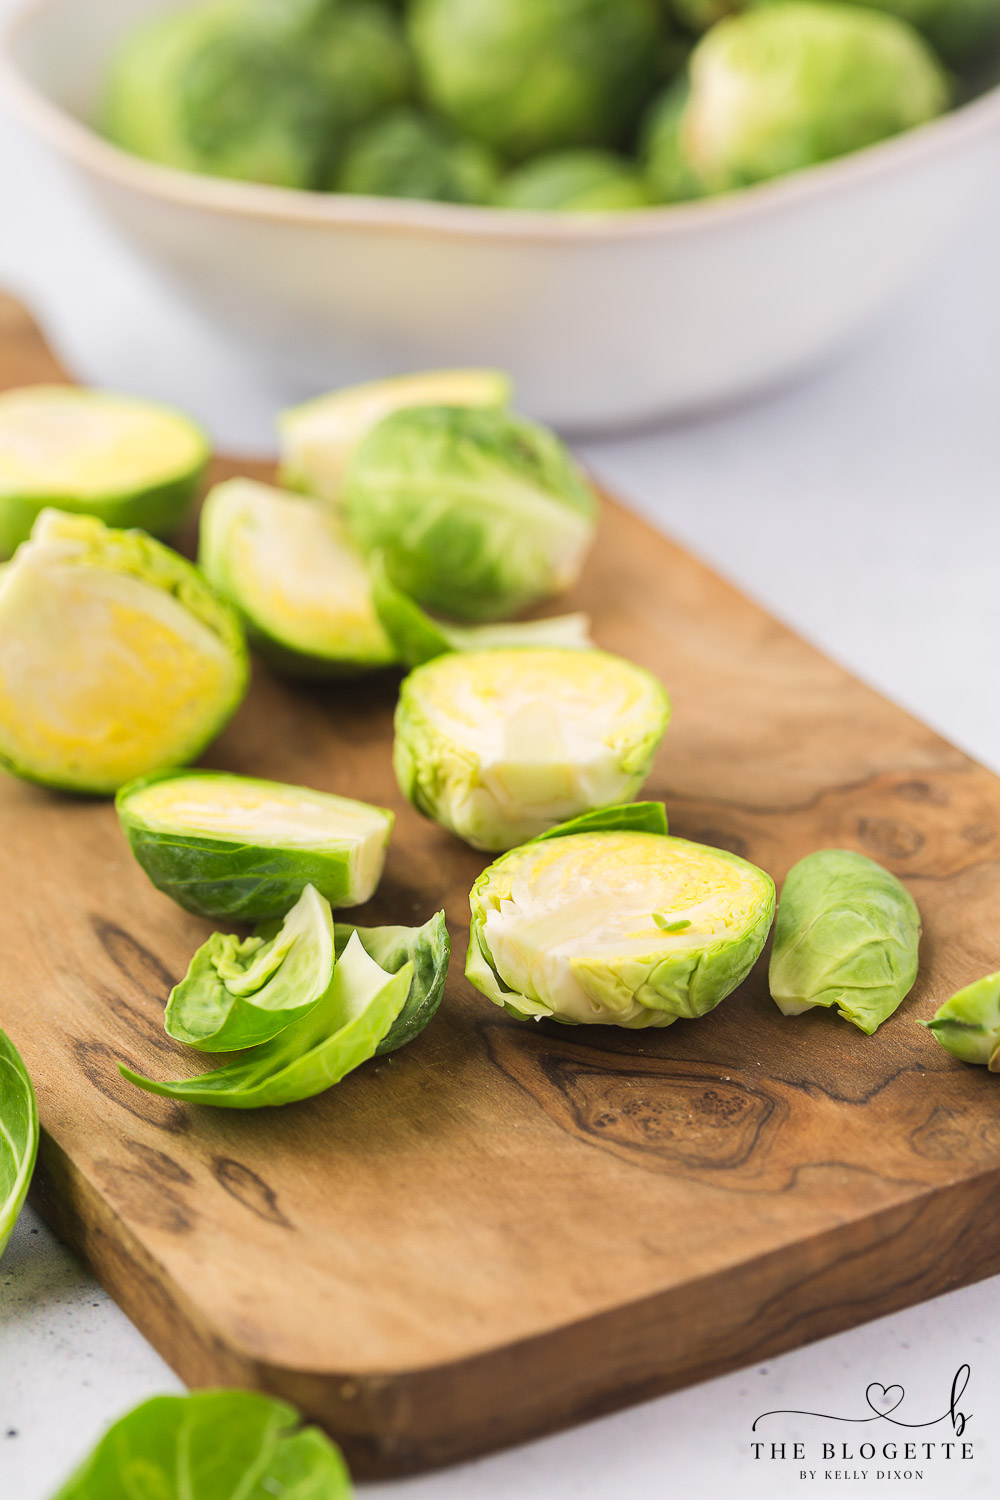 How to trim Brussels sprouts